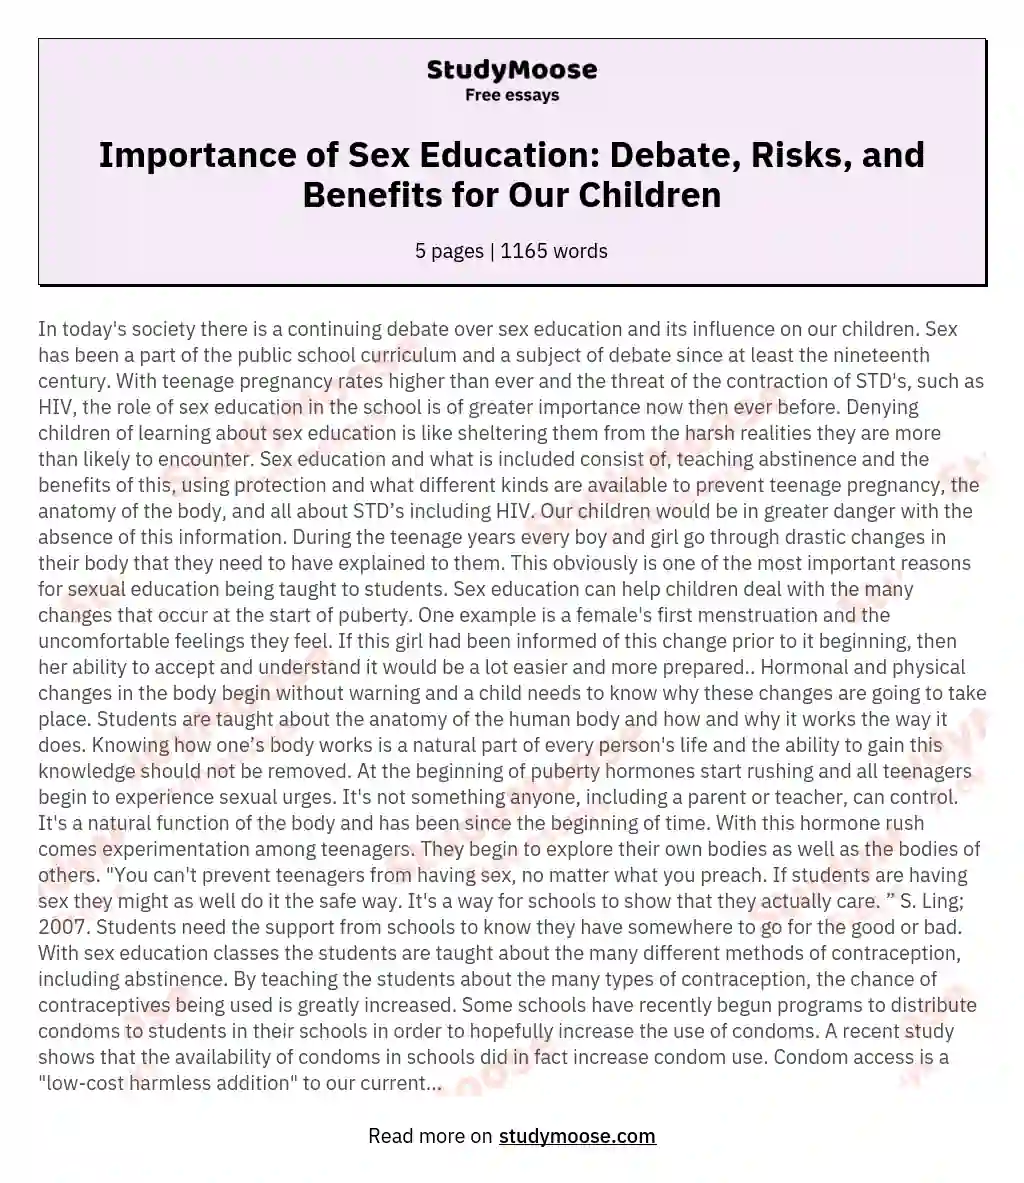 Importance of Sex Education: Debate, Risks, and Benefits for Our Children essay